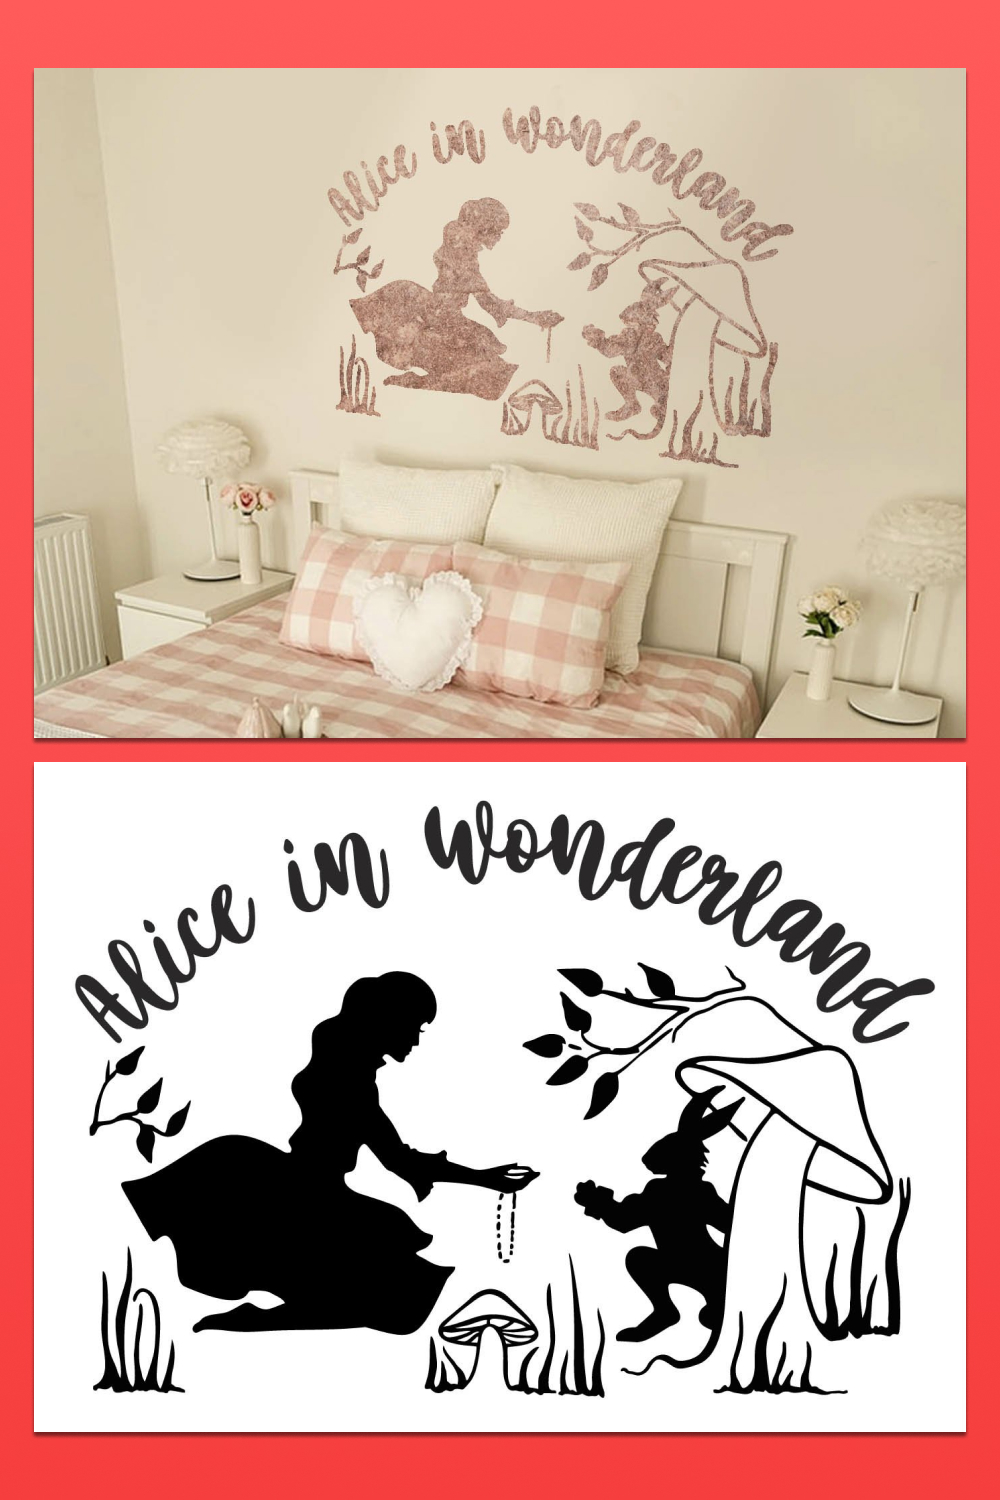 Cool images with prints above the bed with Alice and the rabbit.